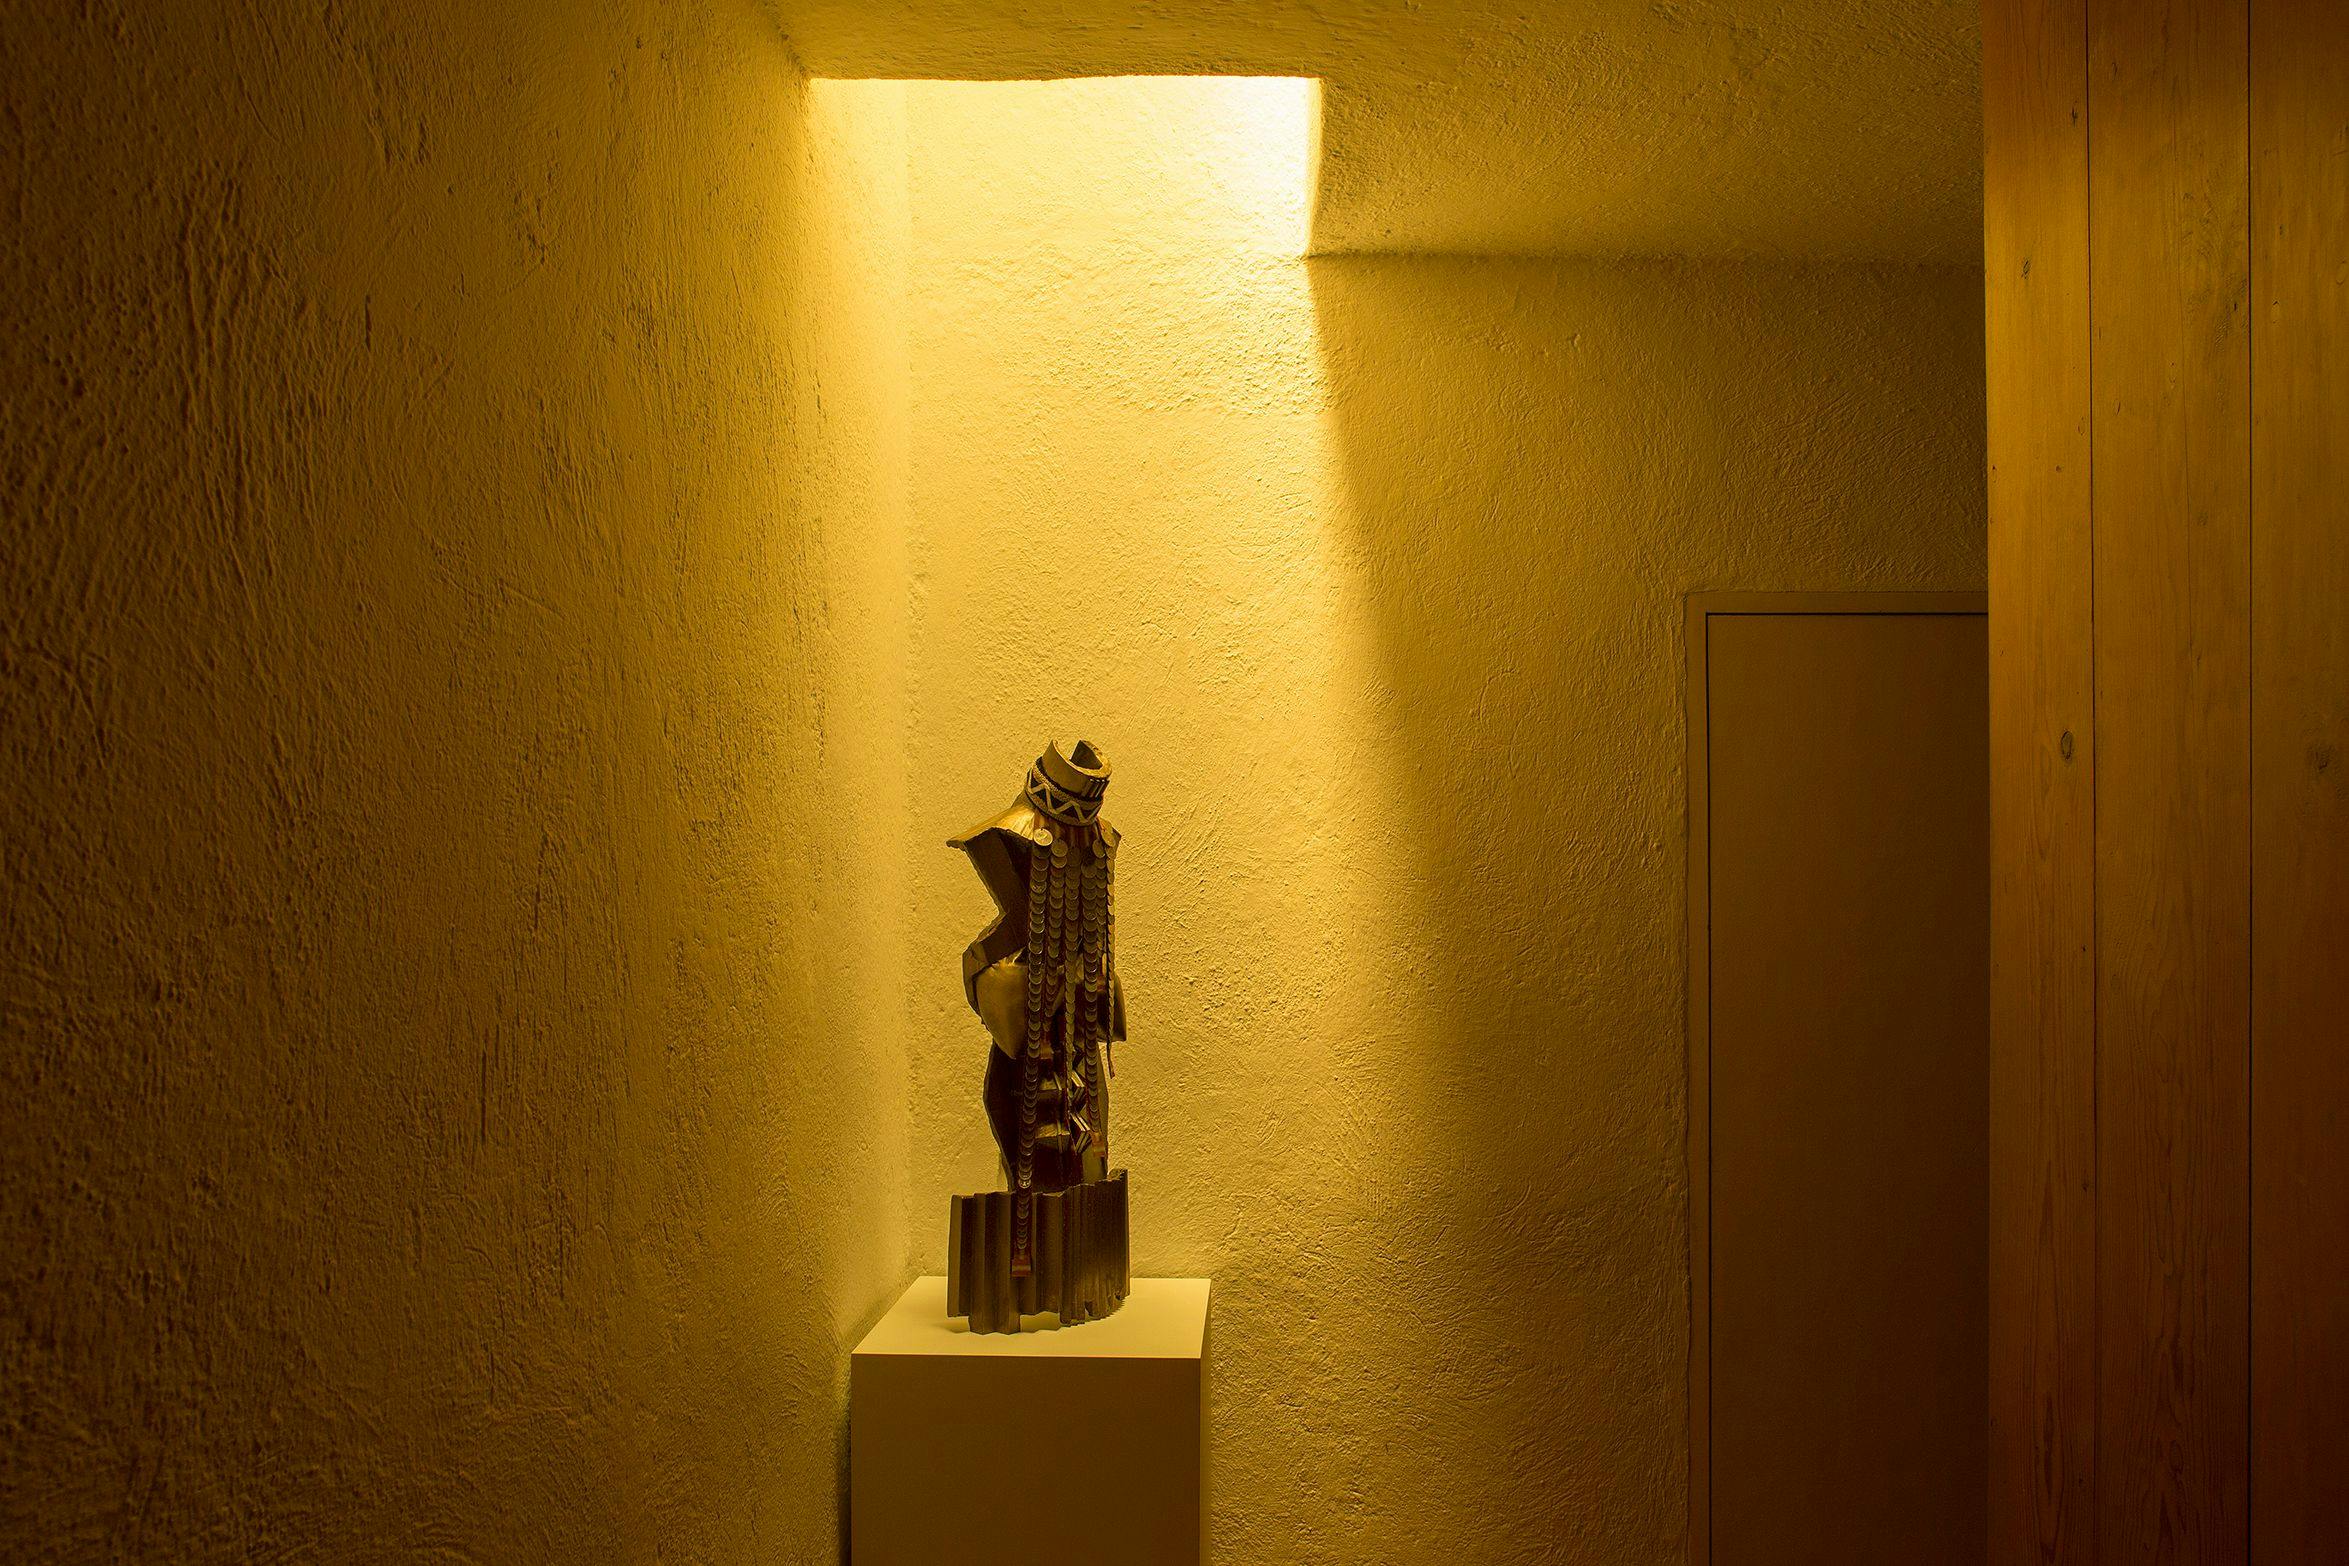 Installation view of the exhibition, Emissaries for Things Abandoned by Gods, at Casa Luis Barragan, in Mexico City, dated 2019.